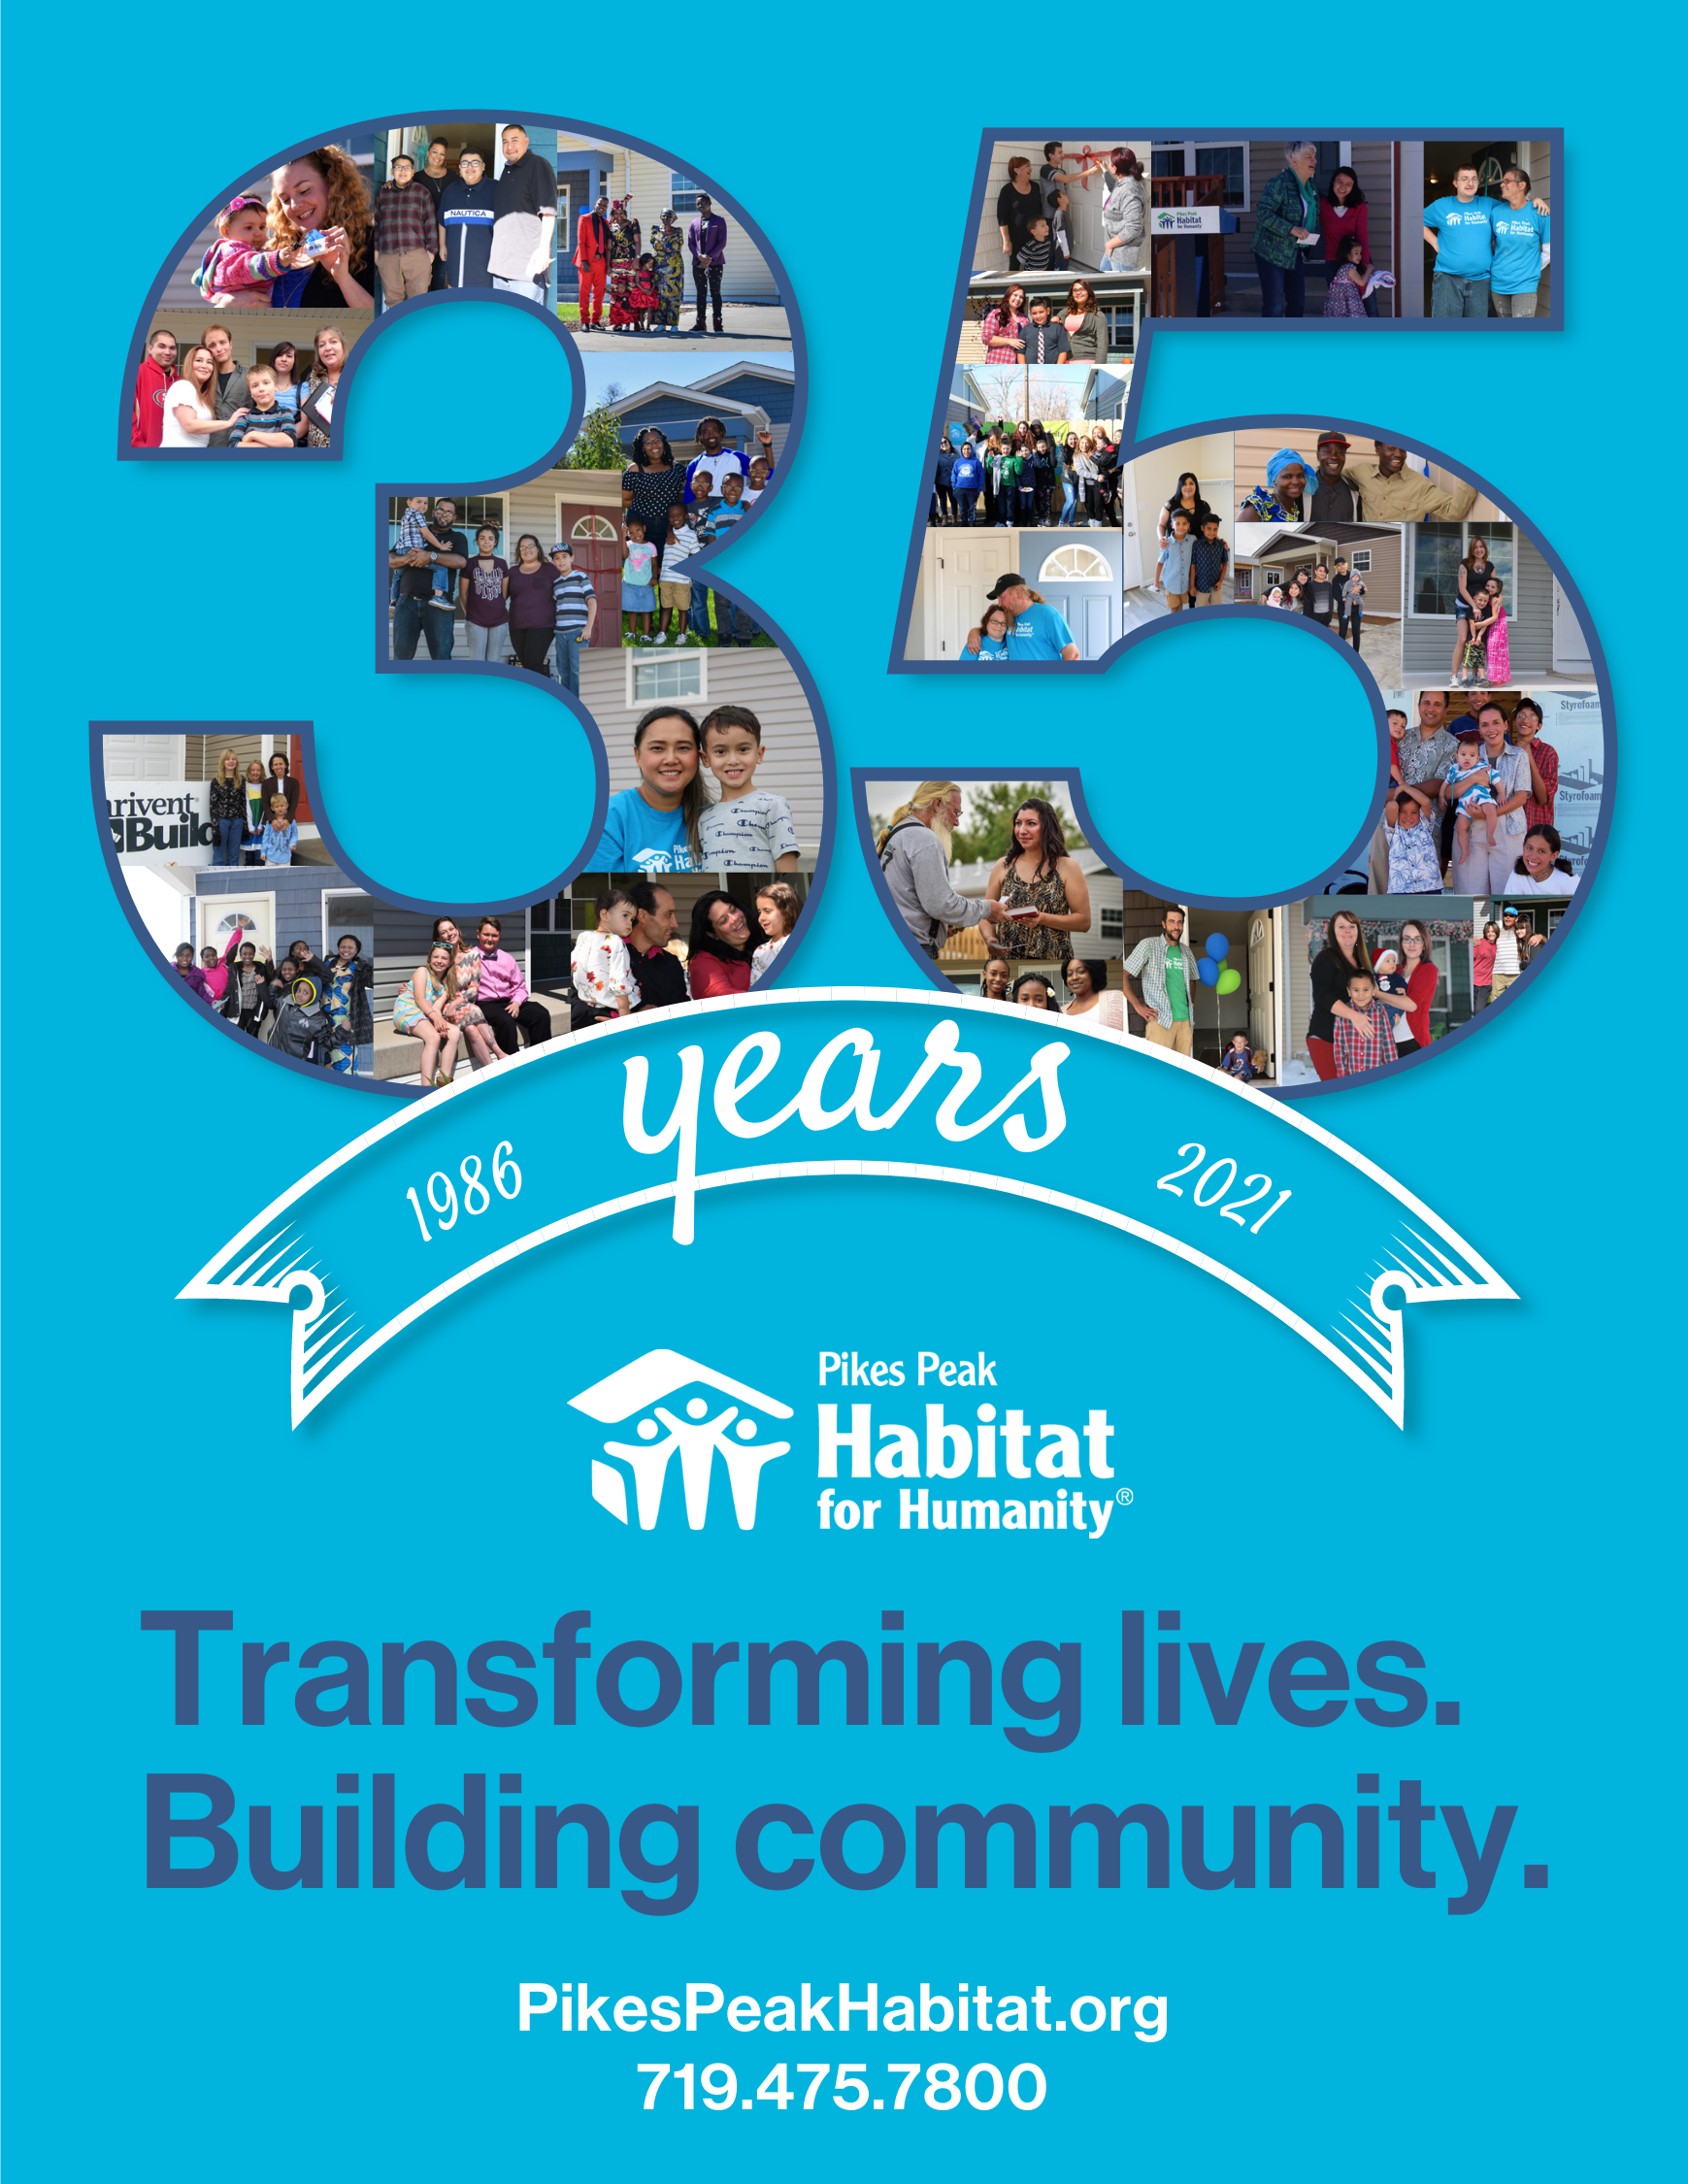 35th Anniversary Insert – For Publication.pdf